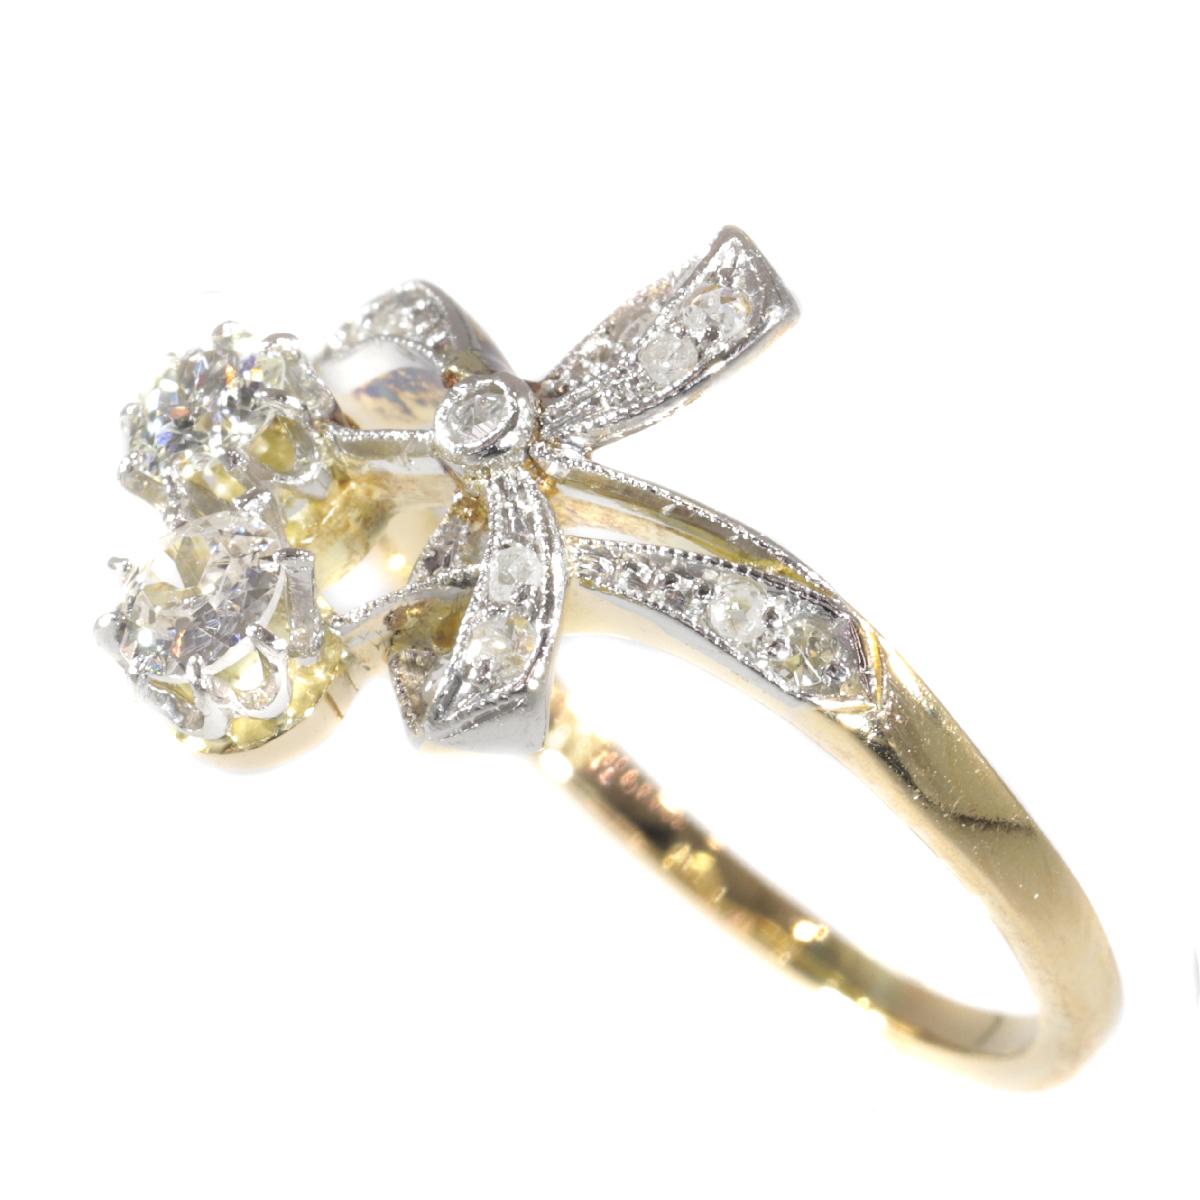 Charming Belle Époque Diamond Engagement Ring, 1900s In Excellent Condition For Sale In Antwerp, BE